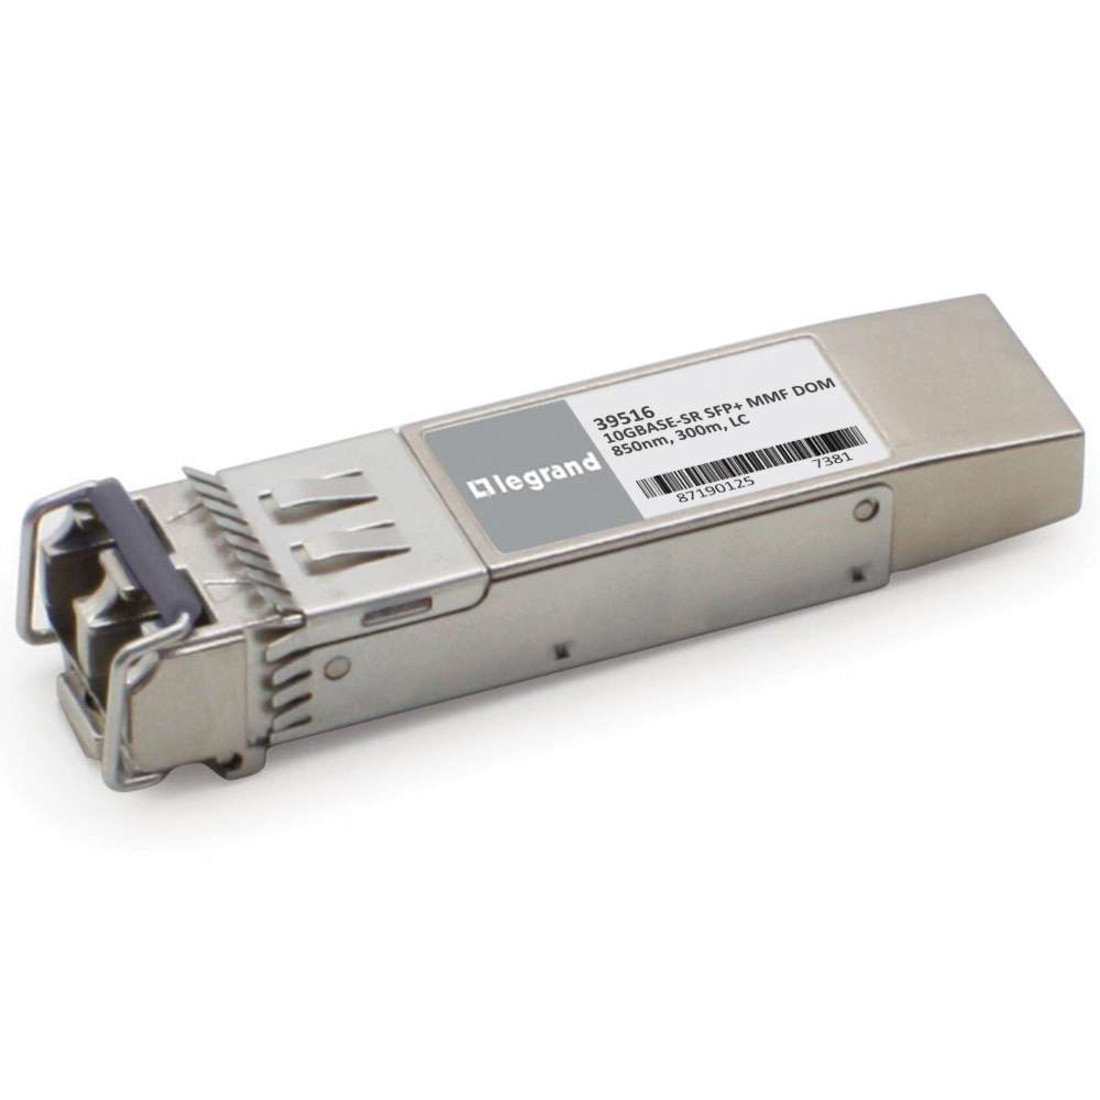 C2G Extreme Networks 10301 Compatible 10GBase-SR MMF SFP+ Transceiver ModuleFor Optical Network, Data Networking1 x LC 10GBase-SR Network -… 39473